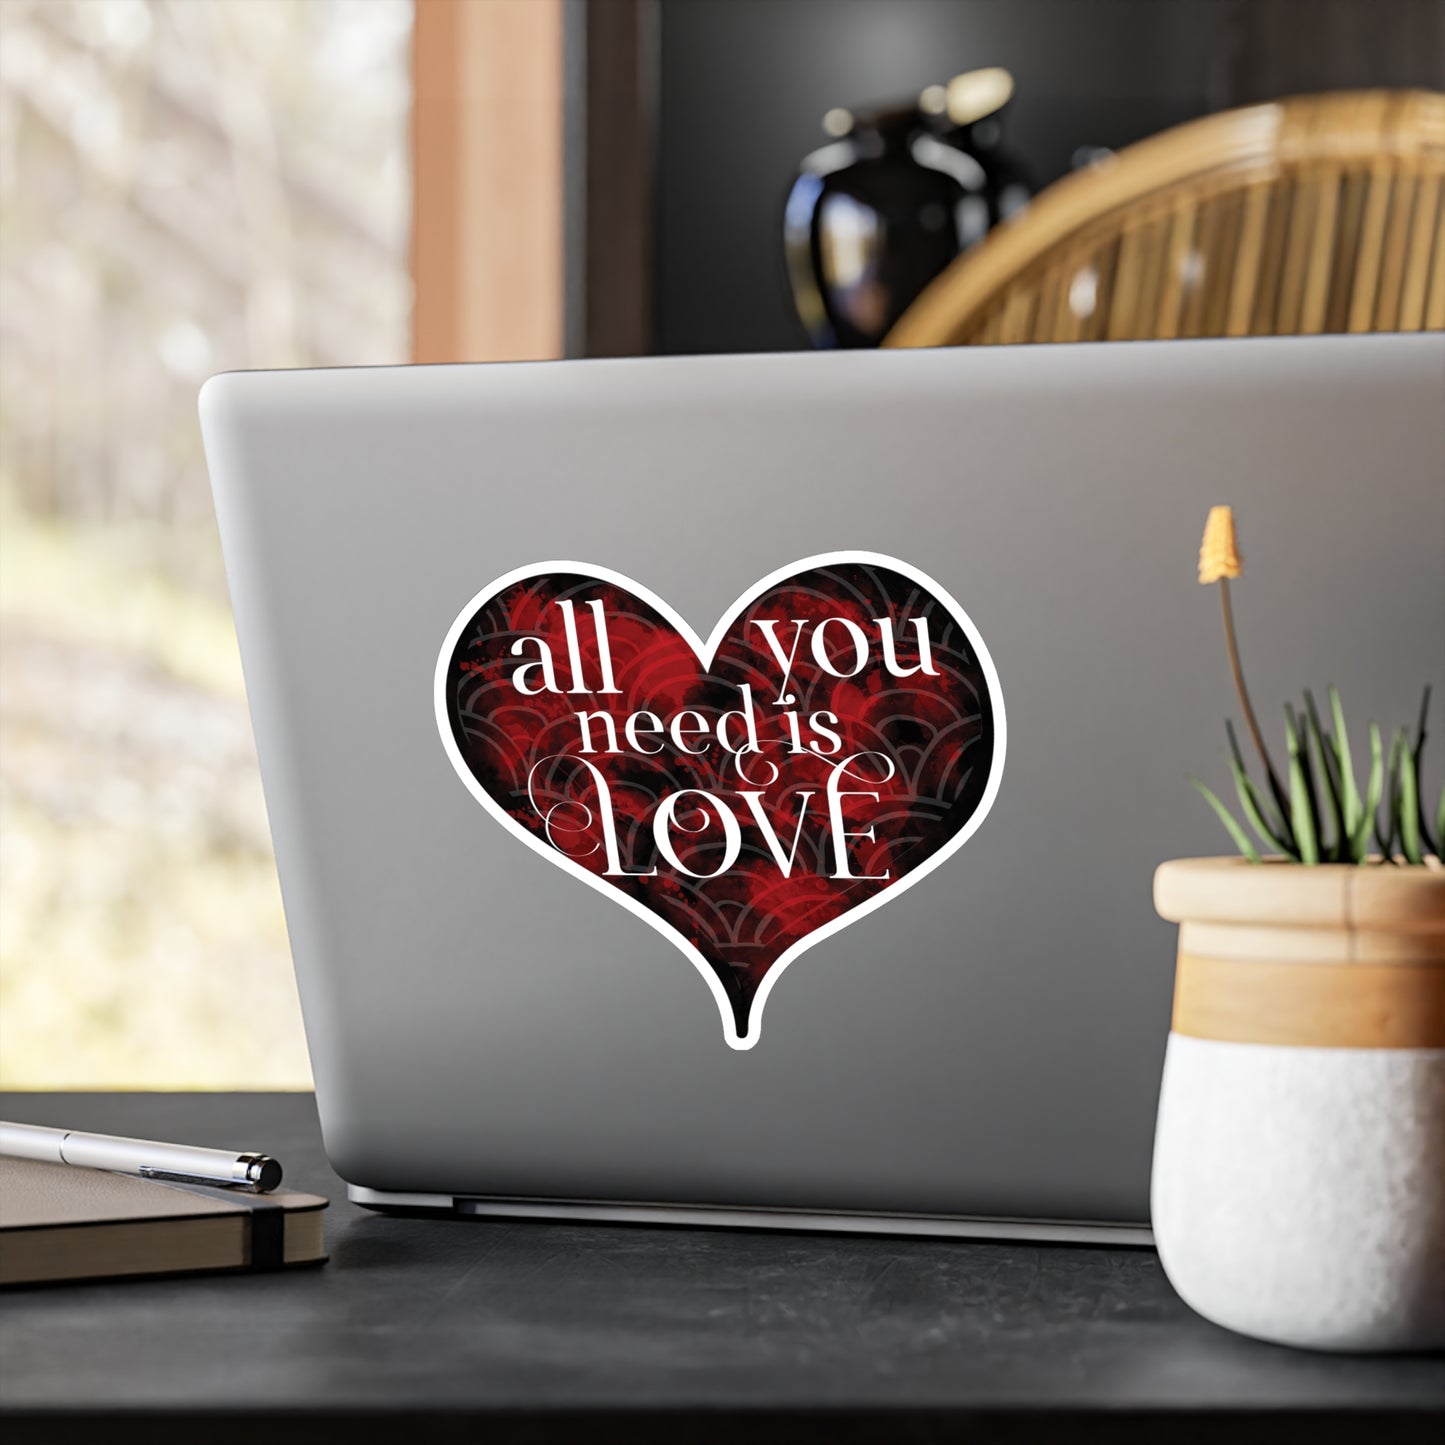 All You Need Is Love Sticker - Motivational Treats